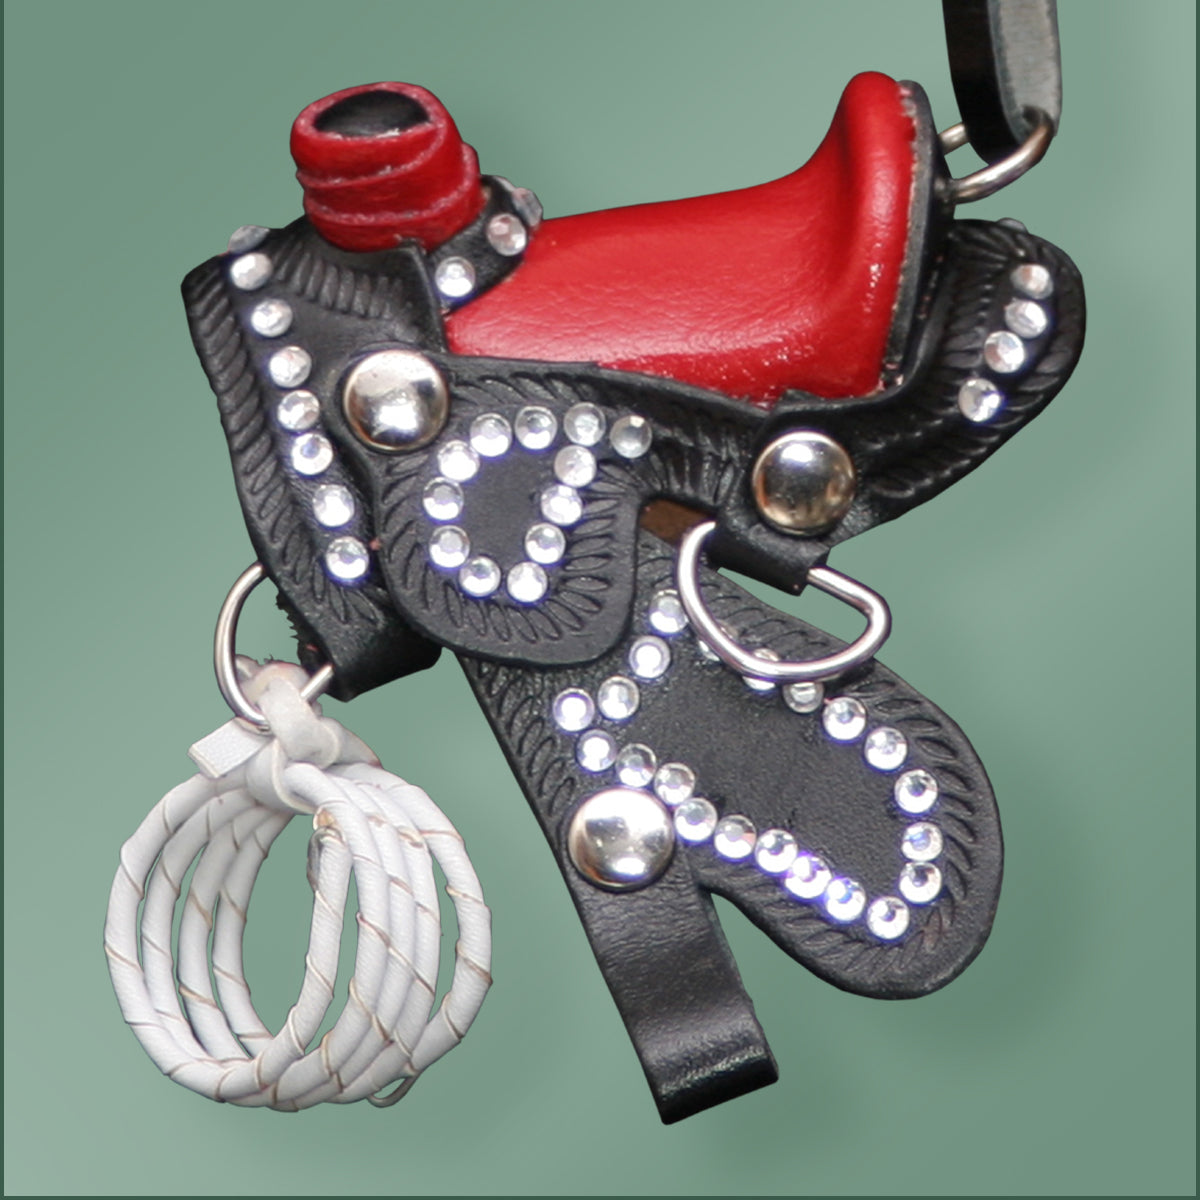 Leather Bling Saddle Ornament - Red/Black